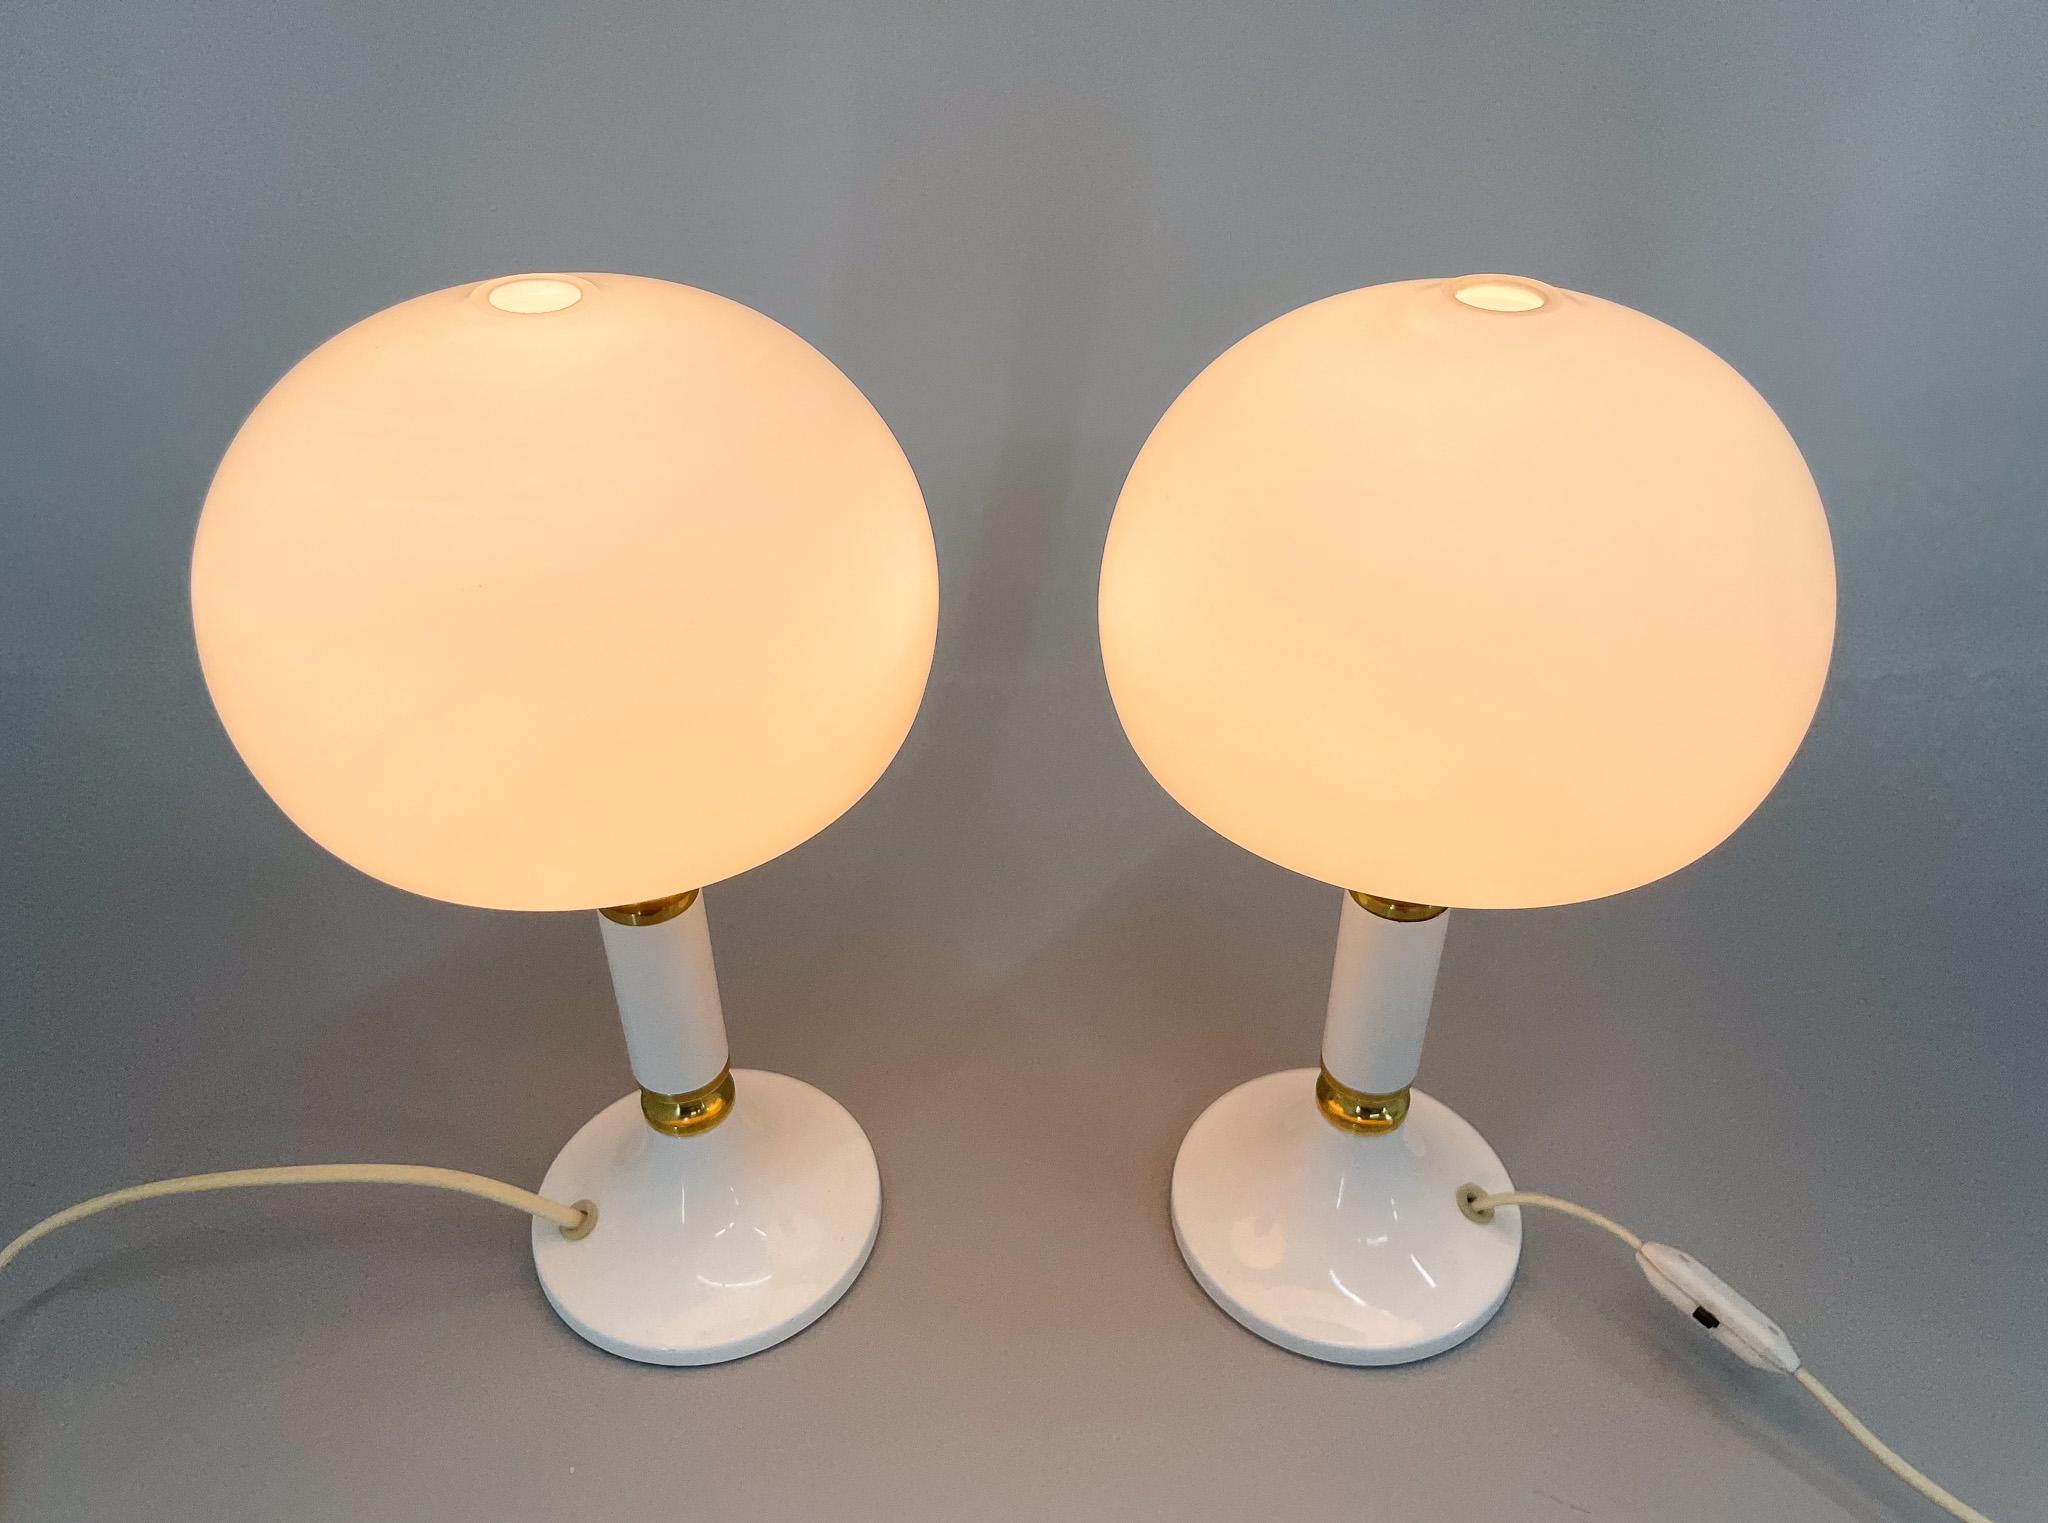 Pair of Mid-century Opaline Glass & Brass Table Lamps by Drukov, Czechoslovakia For Sale 6